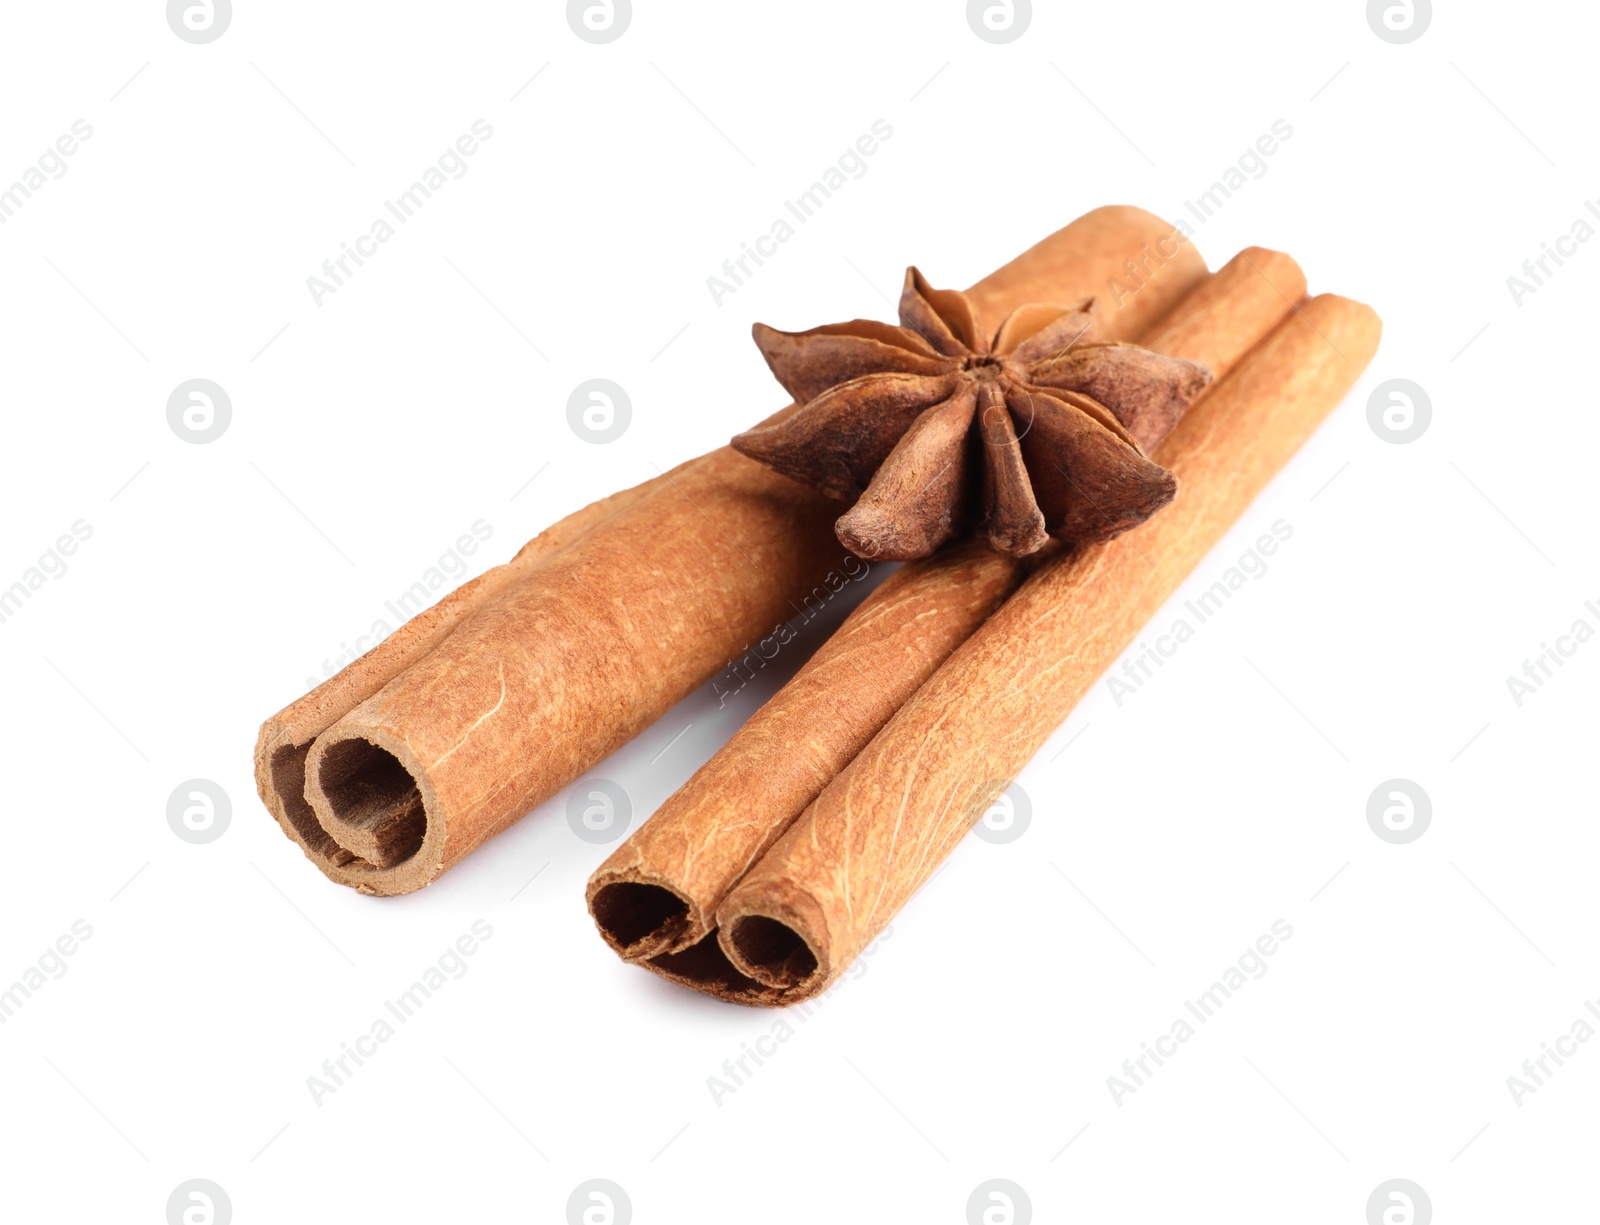 Photo of Cinnamon sticks and anise star isolated on white